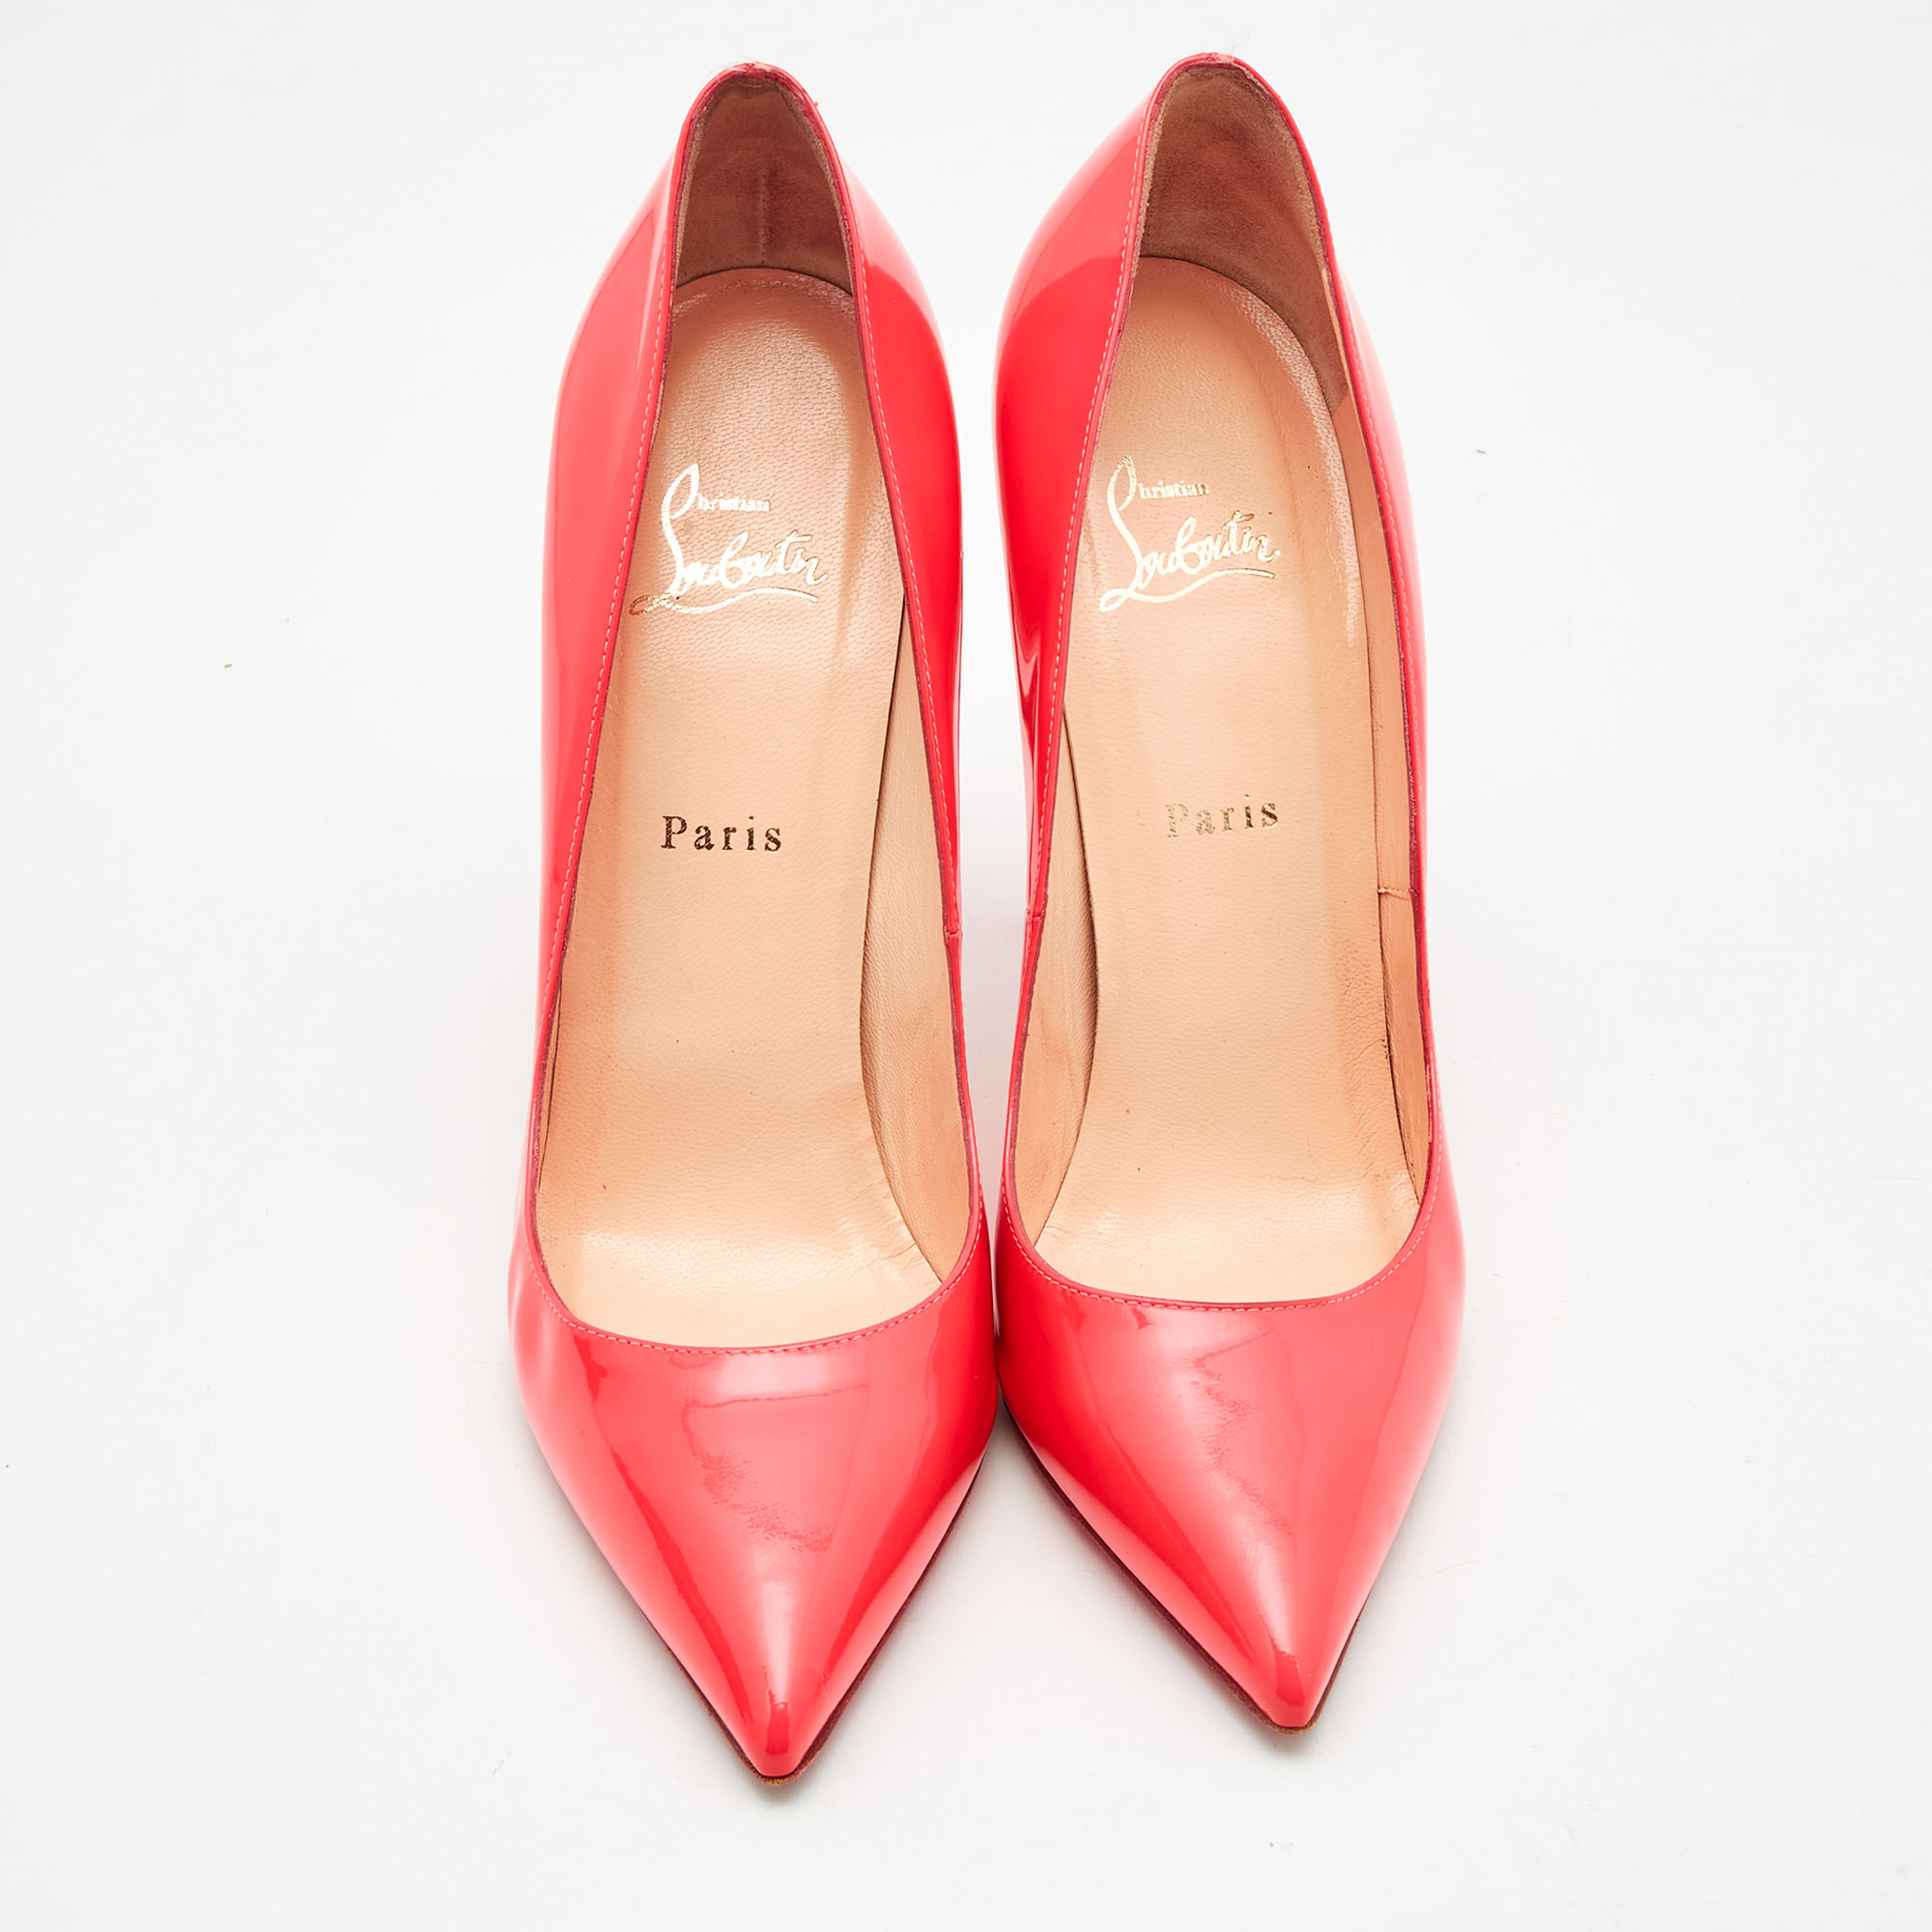 Christian Louboutin Neon Coral Patent Leather So Kate Pointed Toe Pumps Size 40.5